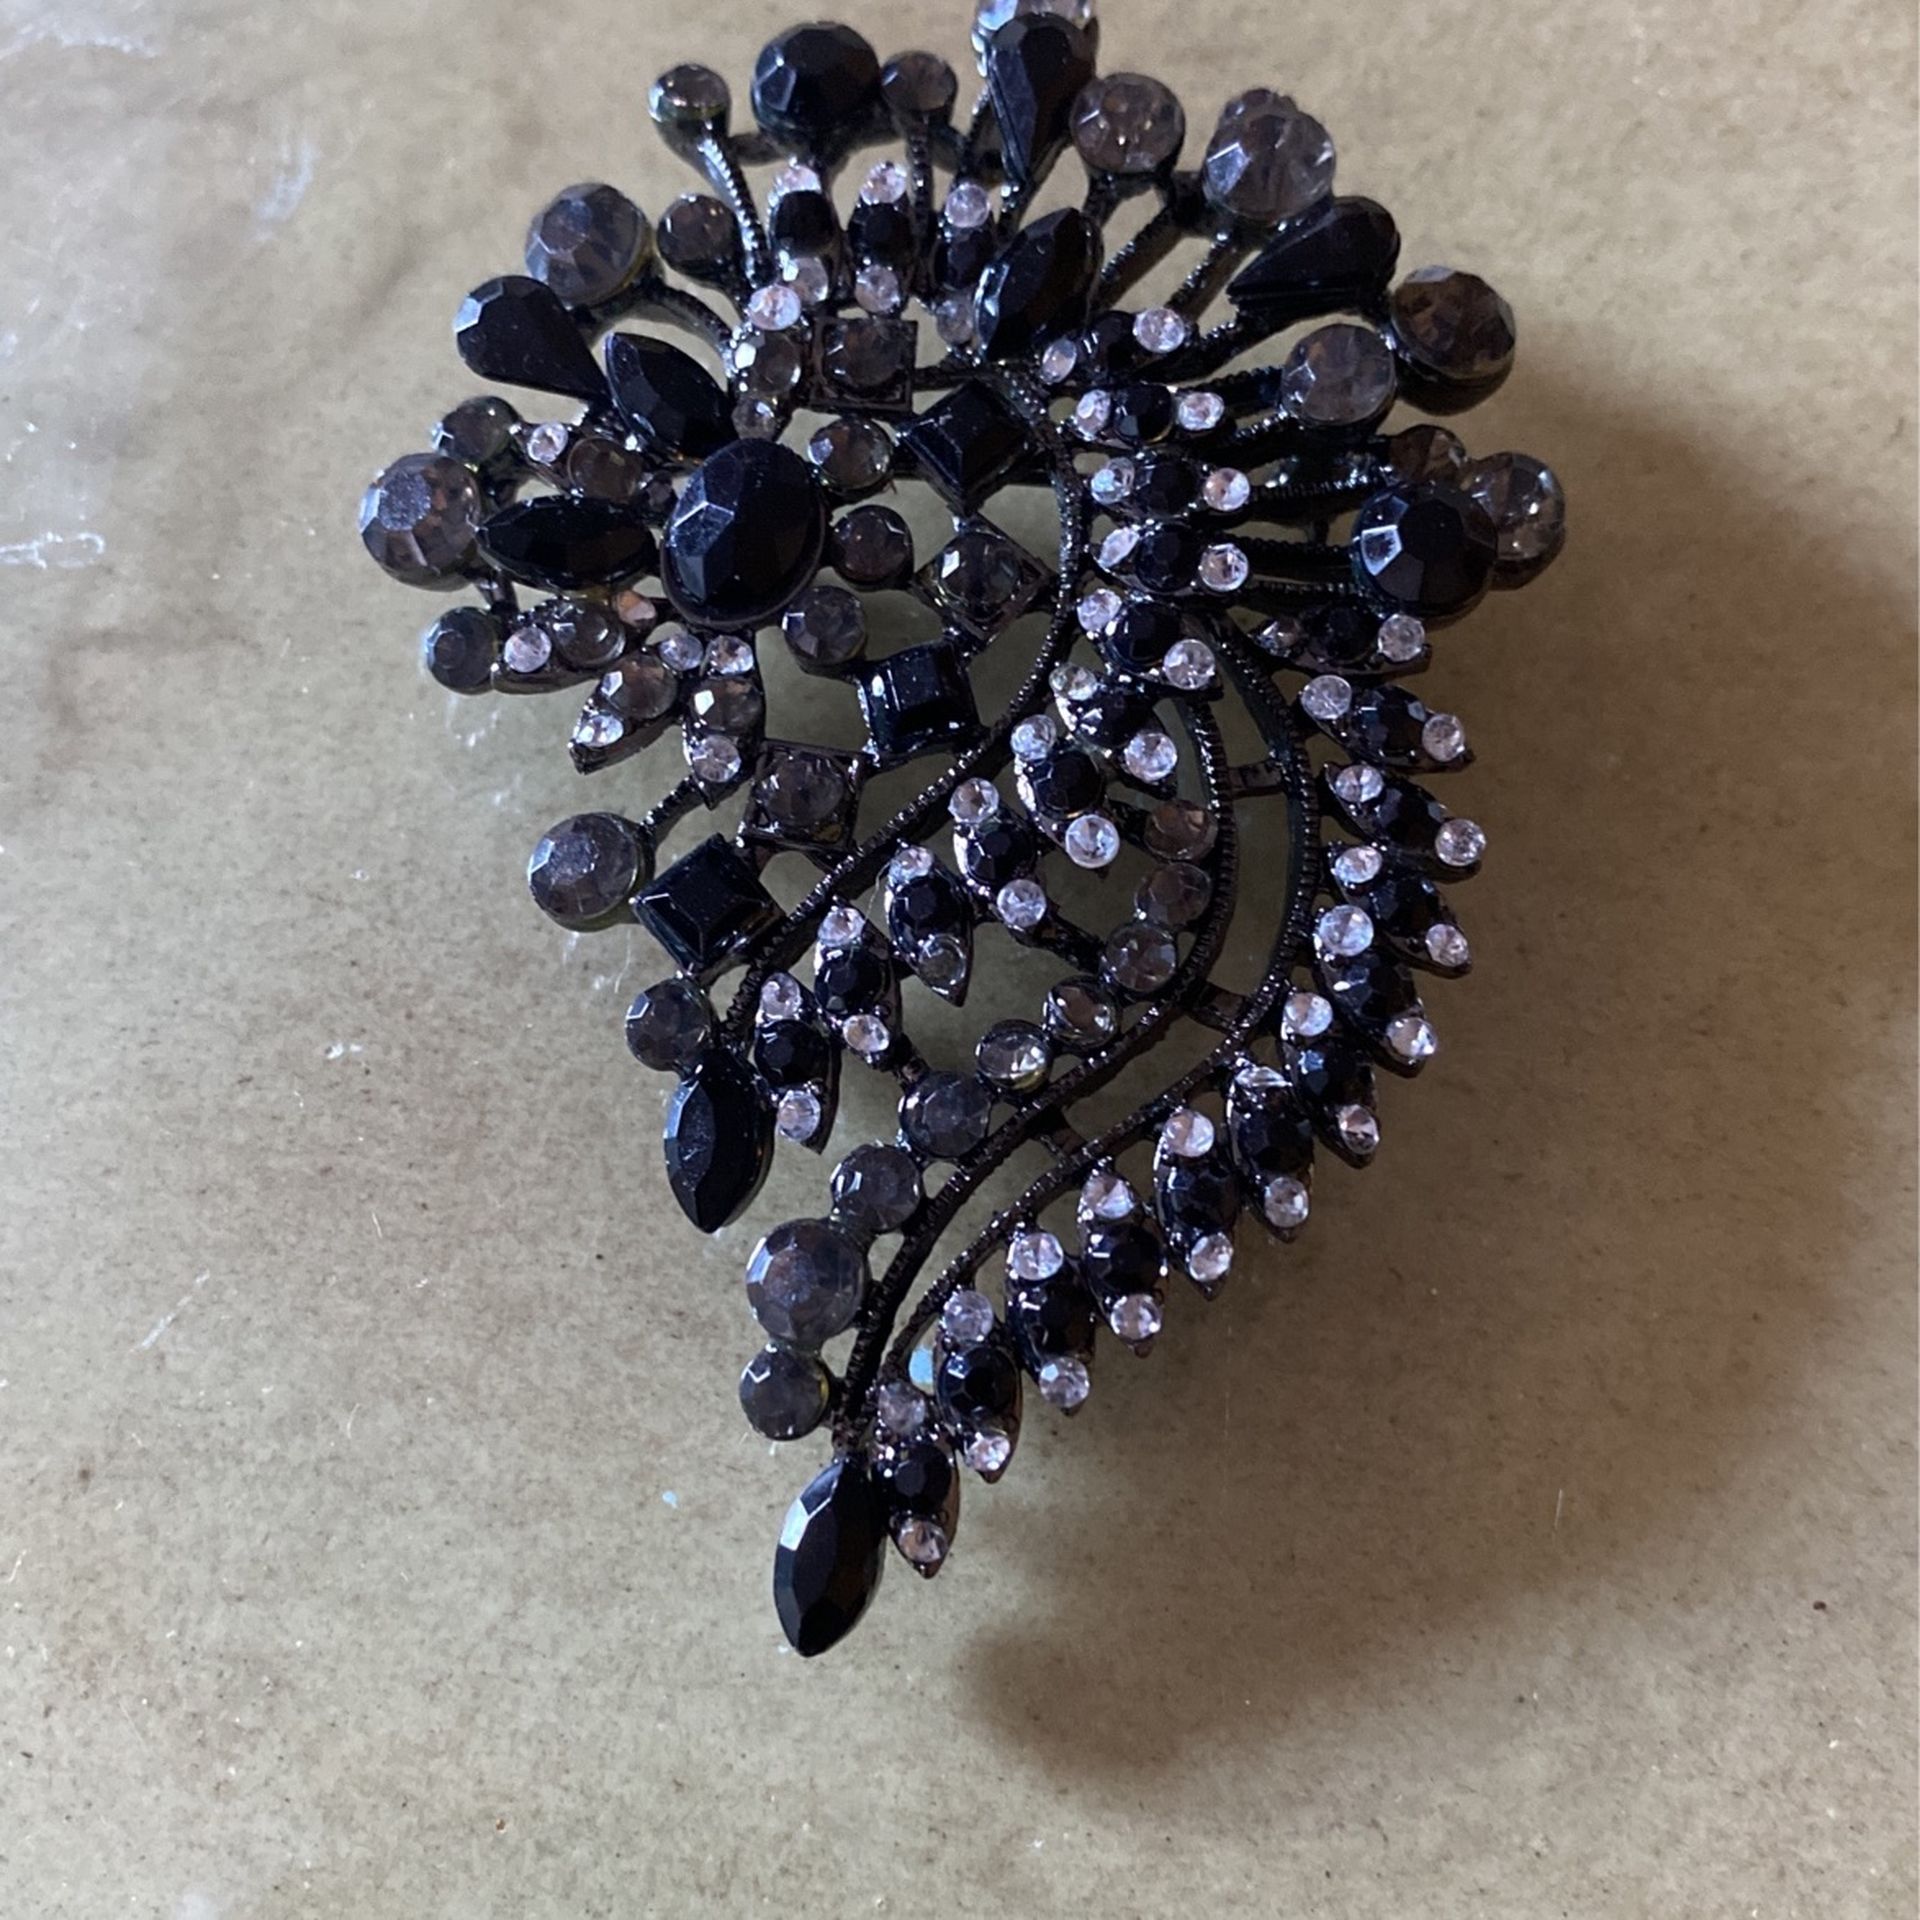 Lovely Vintage 3 inch jewelry pen loaded with clusters of black, gray, and fabulous clear rhinestones